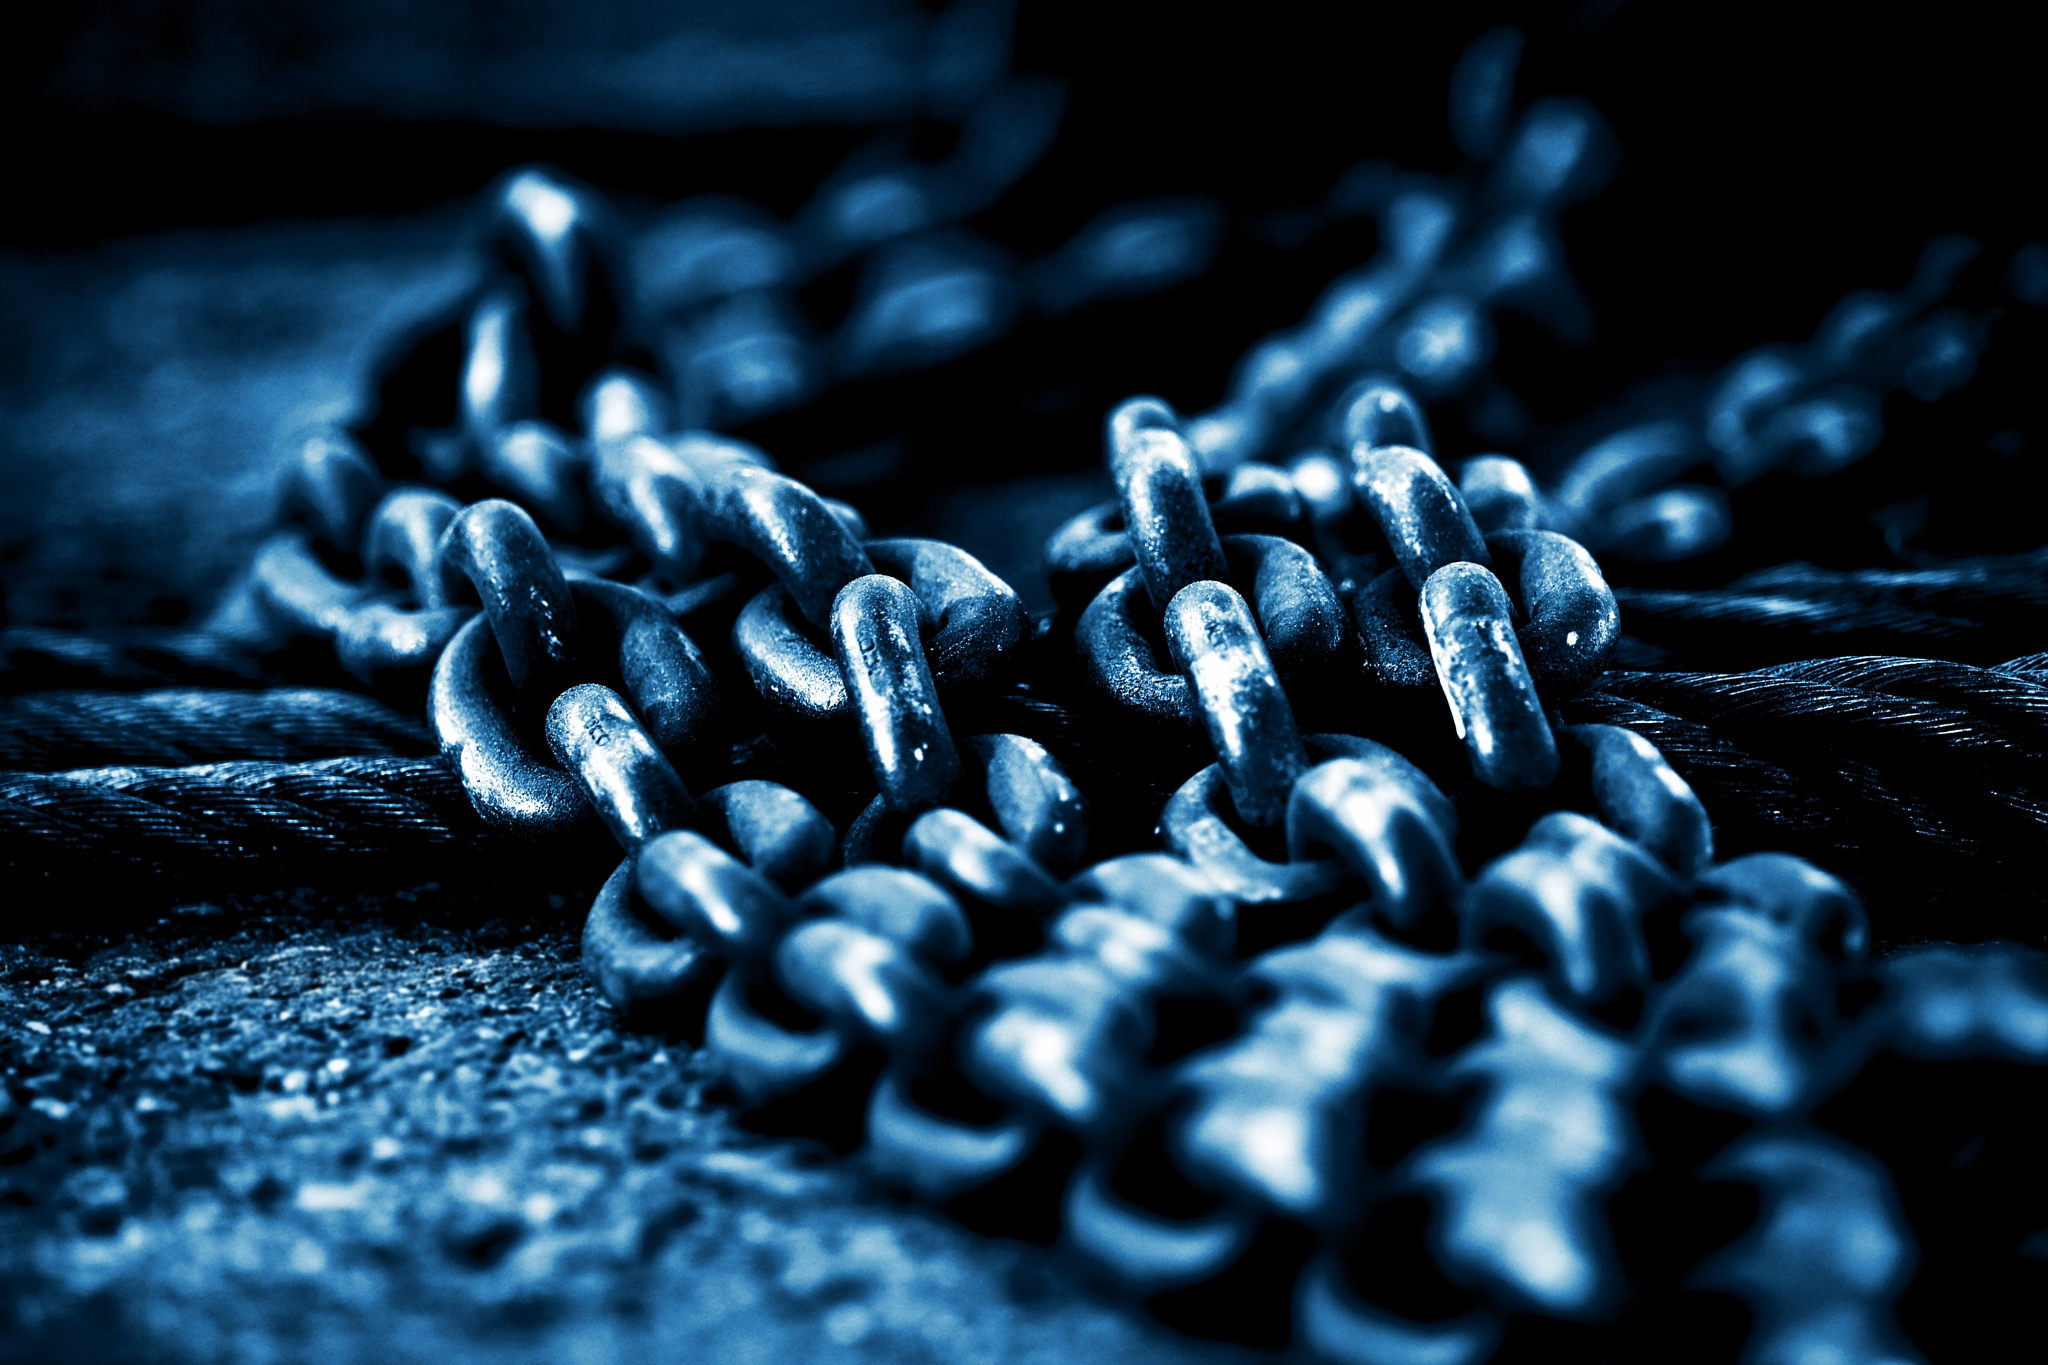 Sony a99 II sample photo. Chains and ropes photography